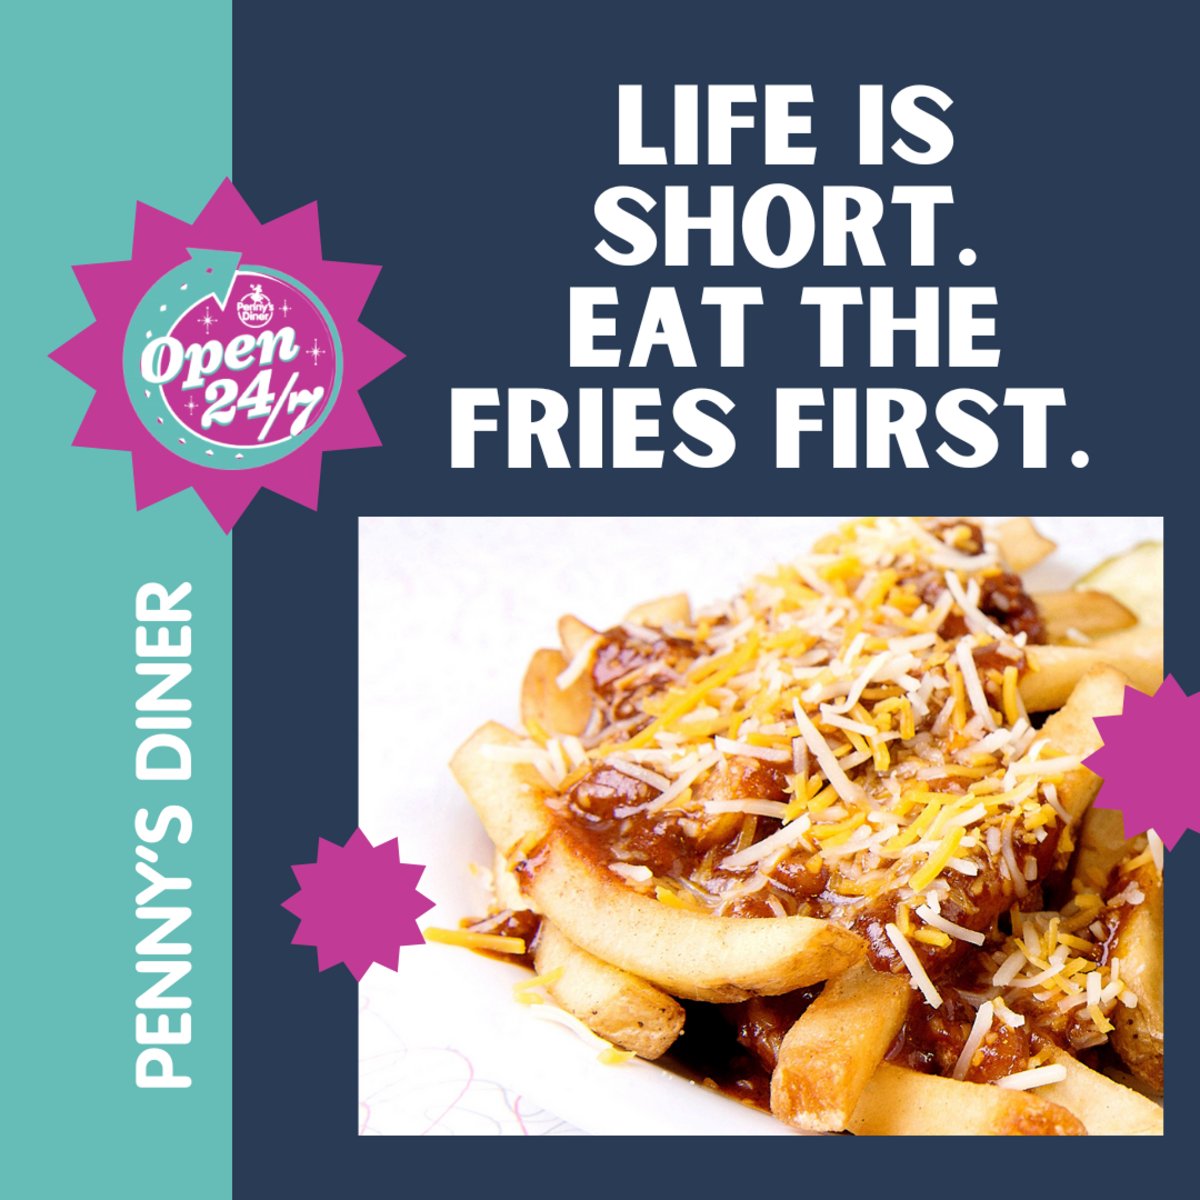 Like we always say at Penny's Diner Wellington, chili cheese the day! Stop by and kick off your feast with a basket of our legendary #chilicheesefries. Get 'em while they're hot!🔥🍟 #PennysDiner